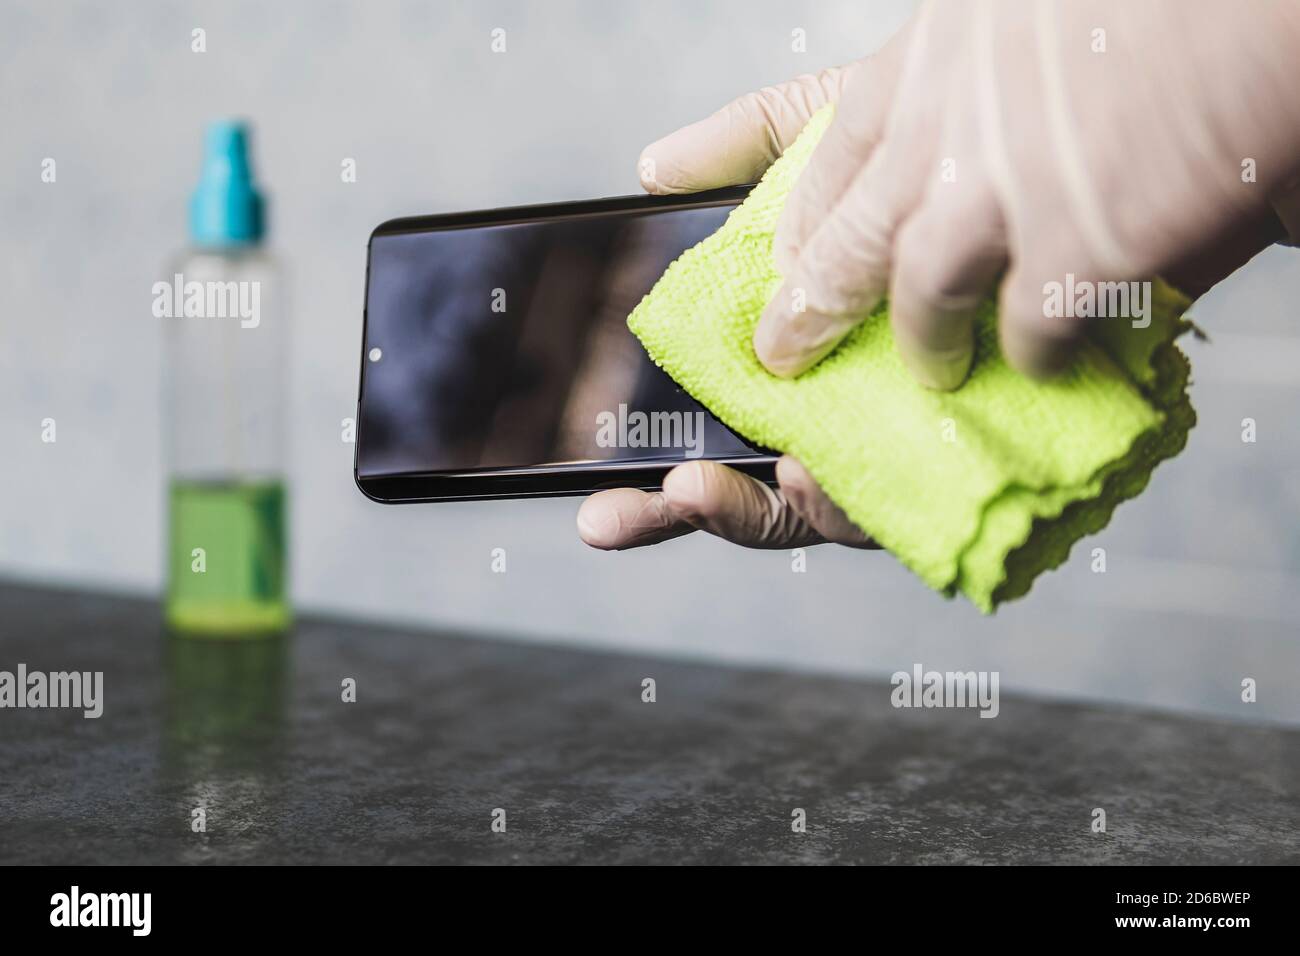 man wipes his mobile phone with a rag. Disinfecting alcohol solution for killing germs on gadgets. method of protection against infections of viruses Stock Photo